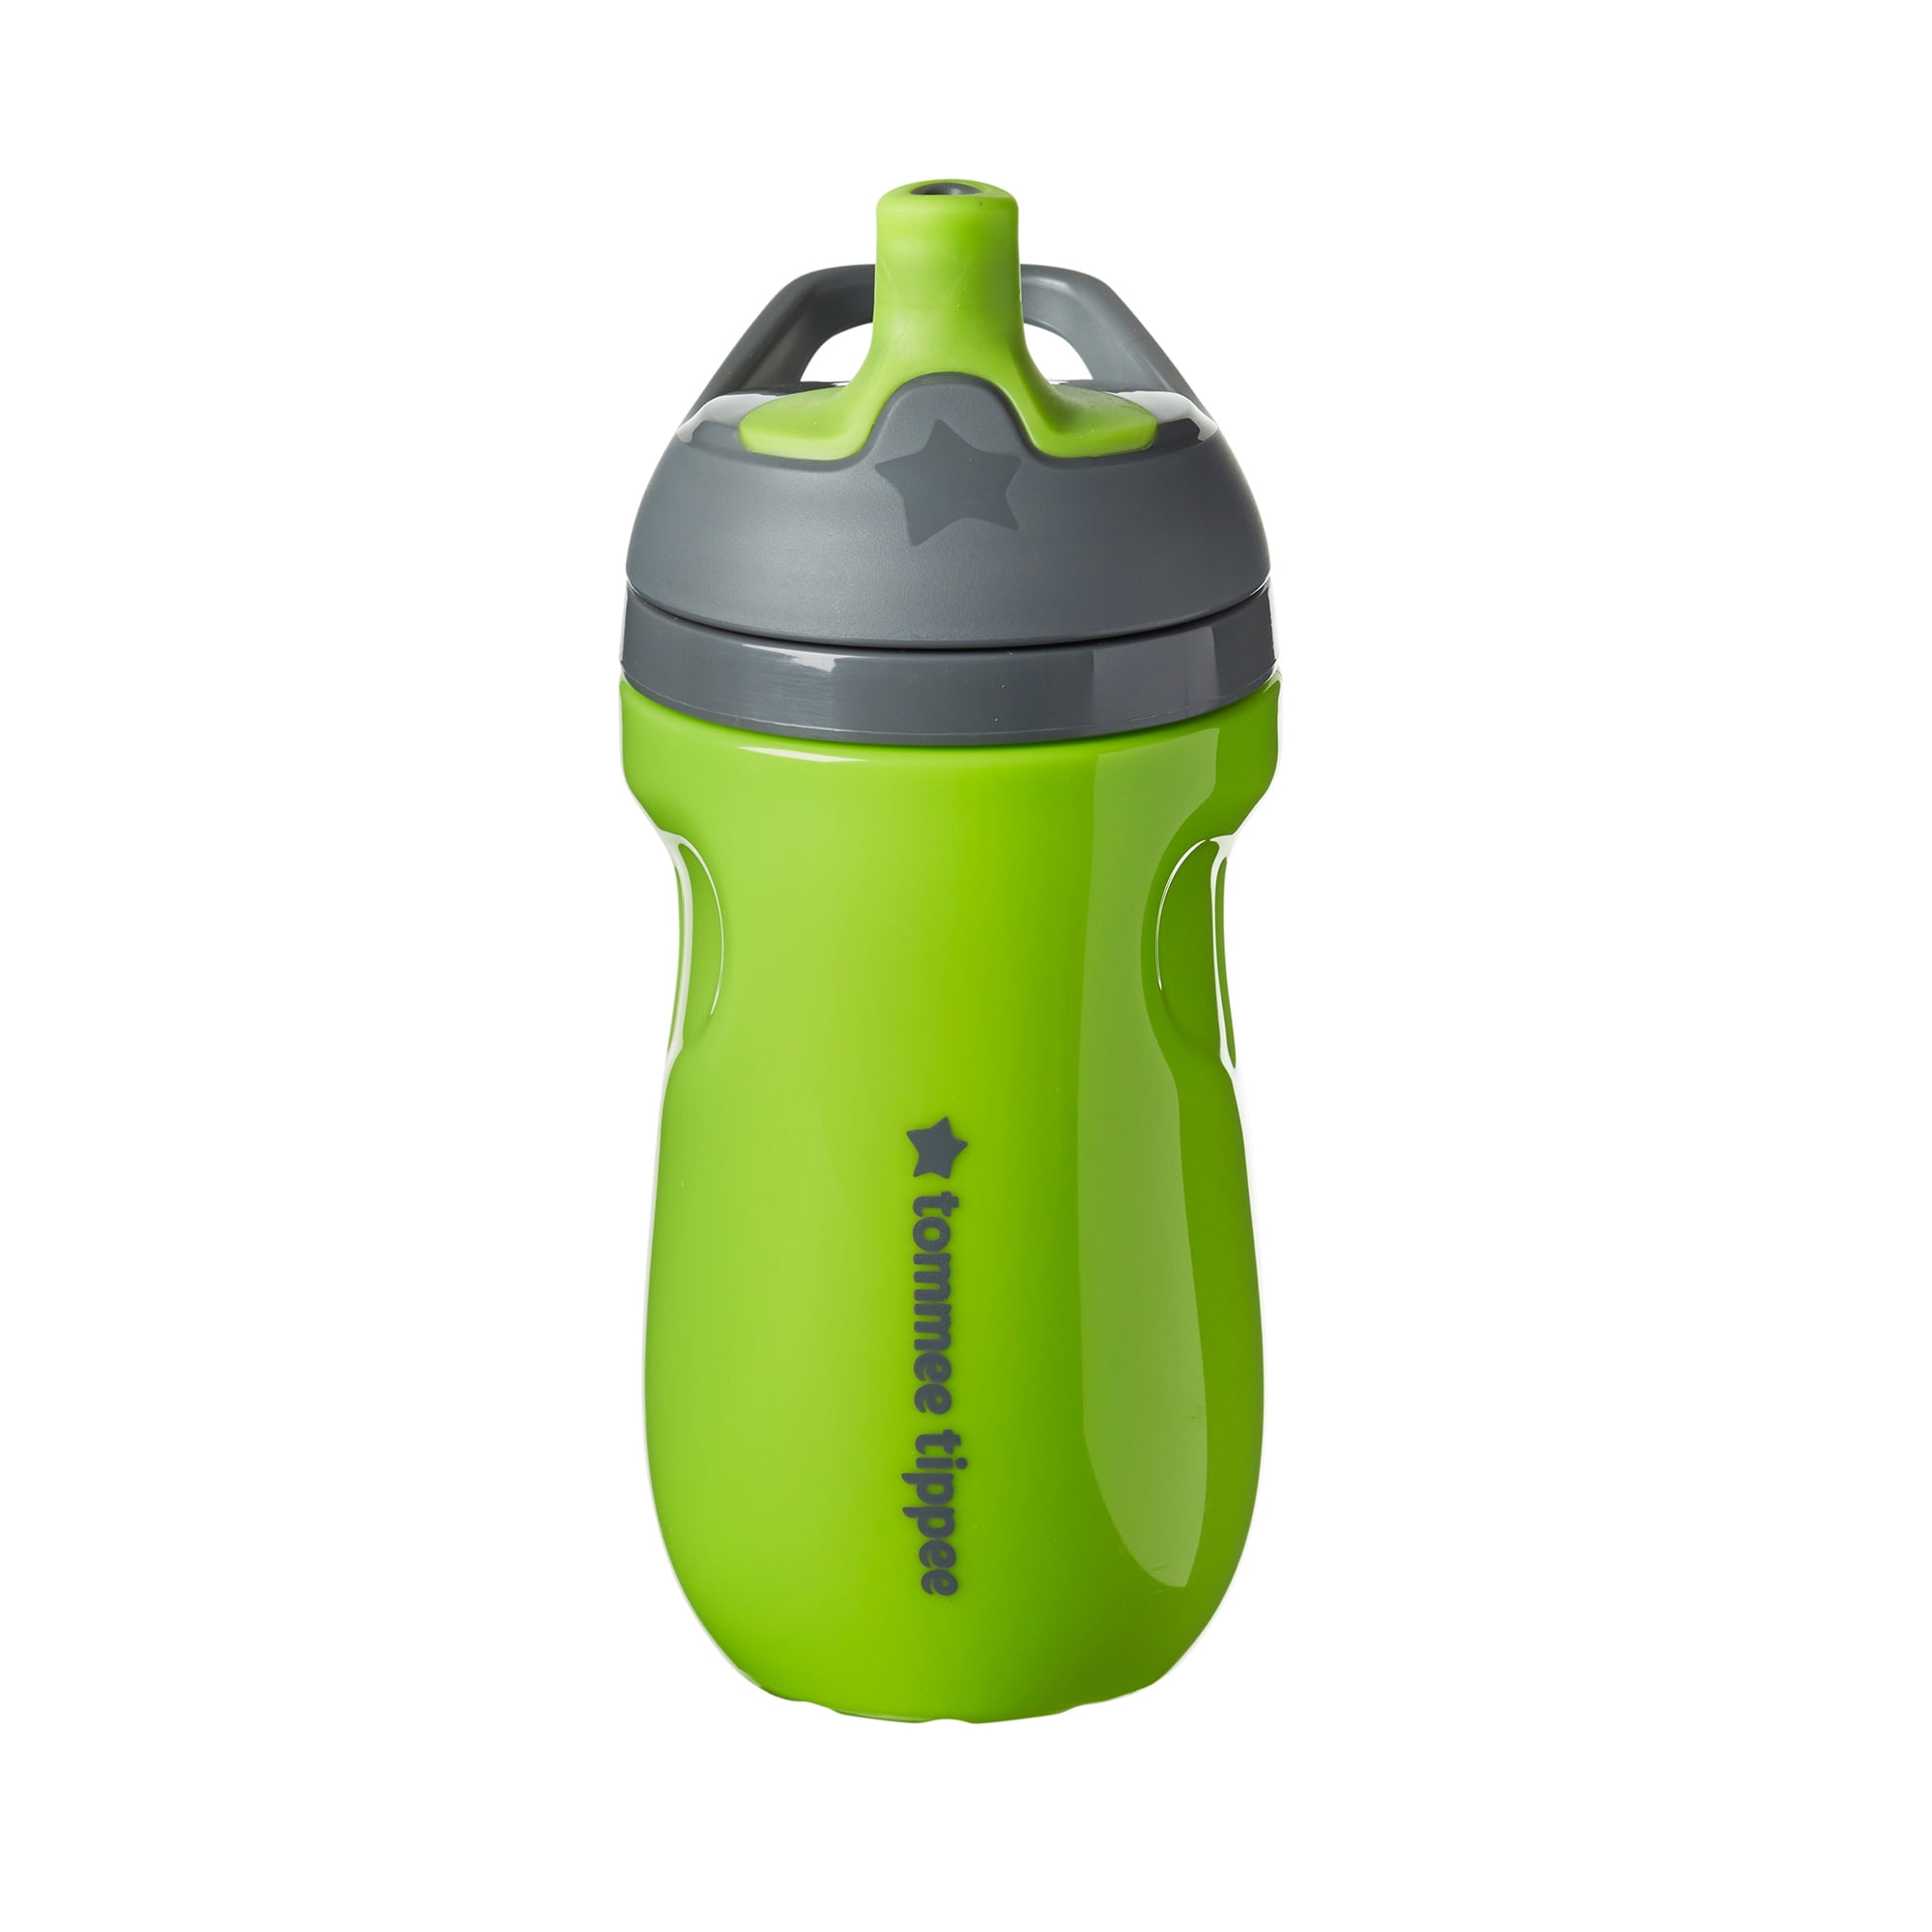 Enjoy picnics with @popyum insulated kids' cups - perfect to keep